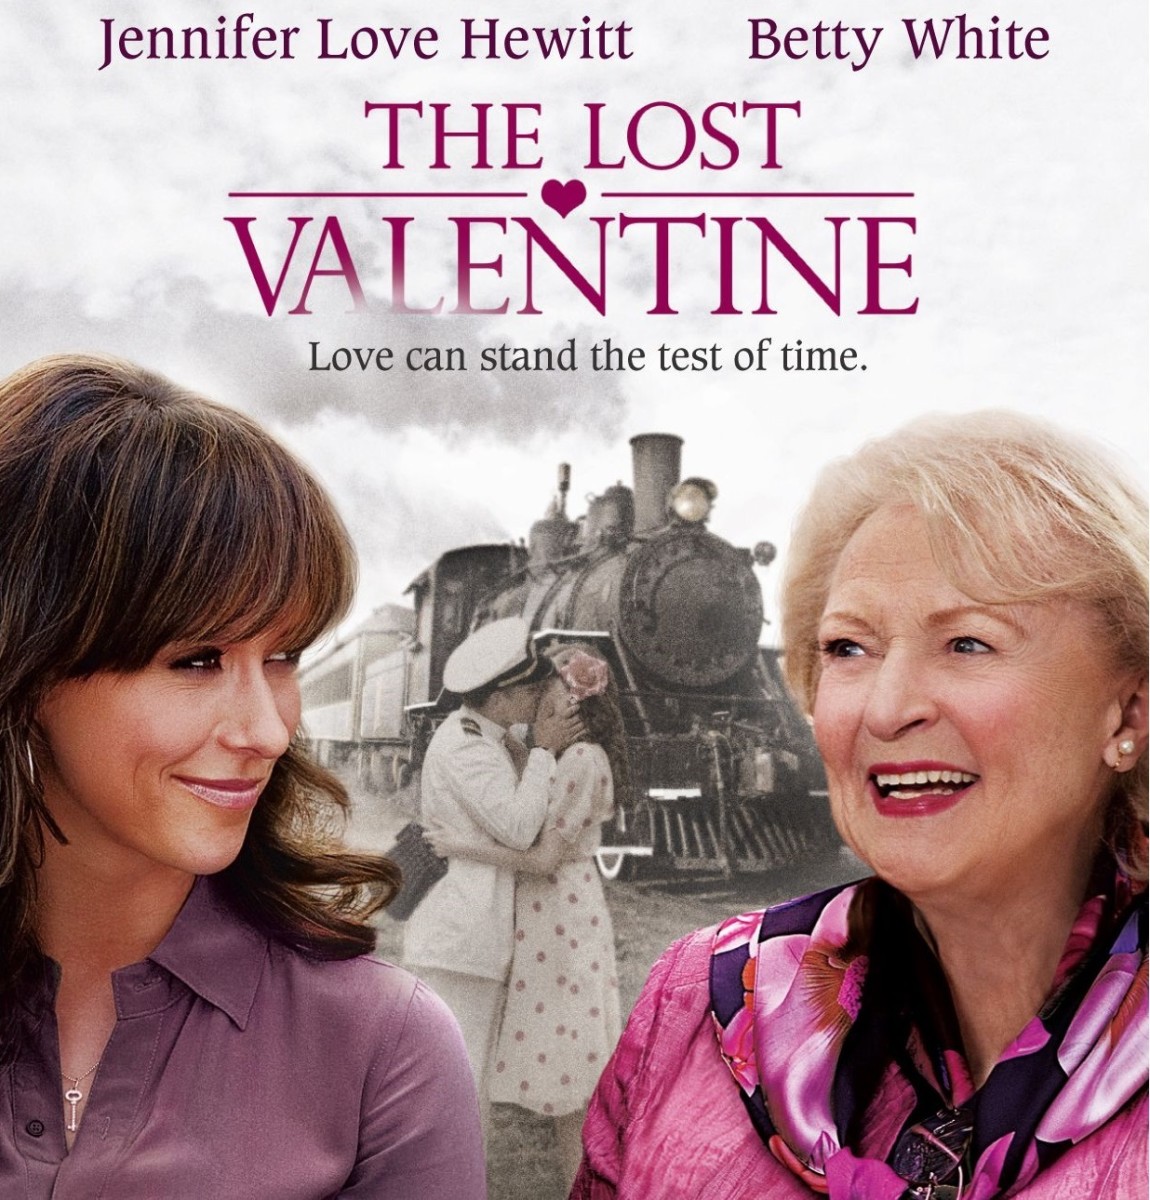 Hallmark Hall of Fame's The Lost Valentine with Jennifer Love Hewitt and Betty White.